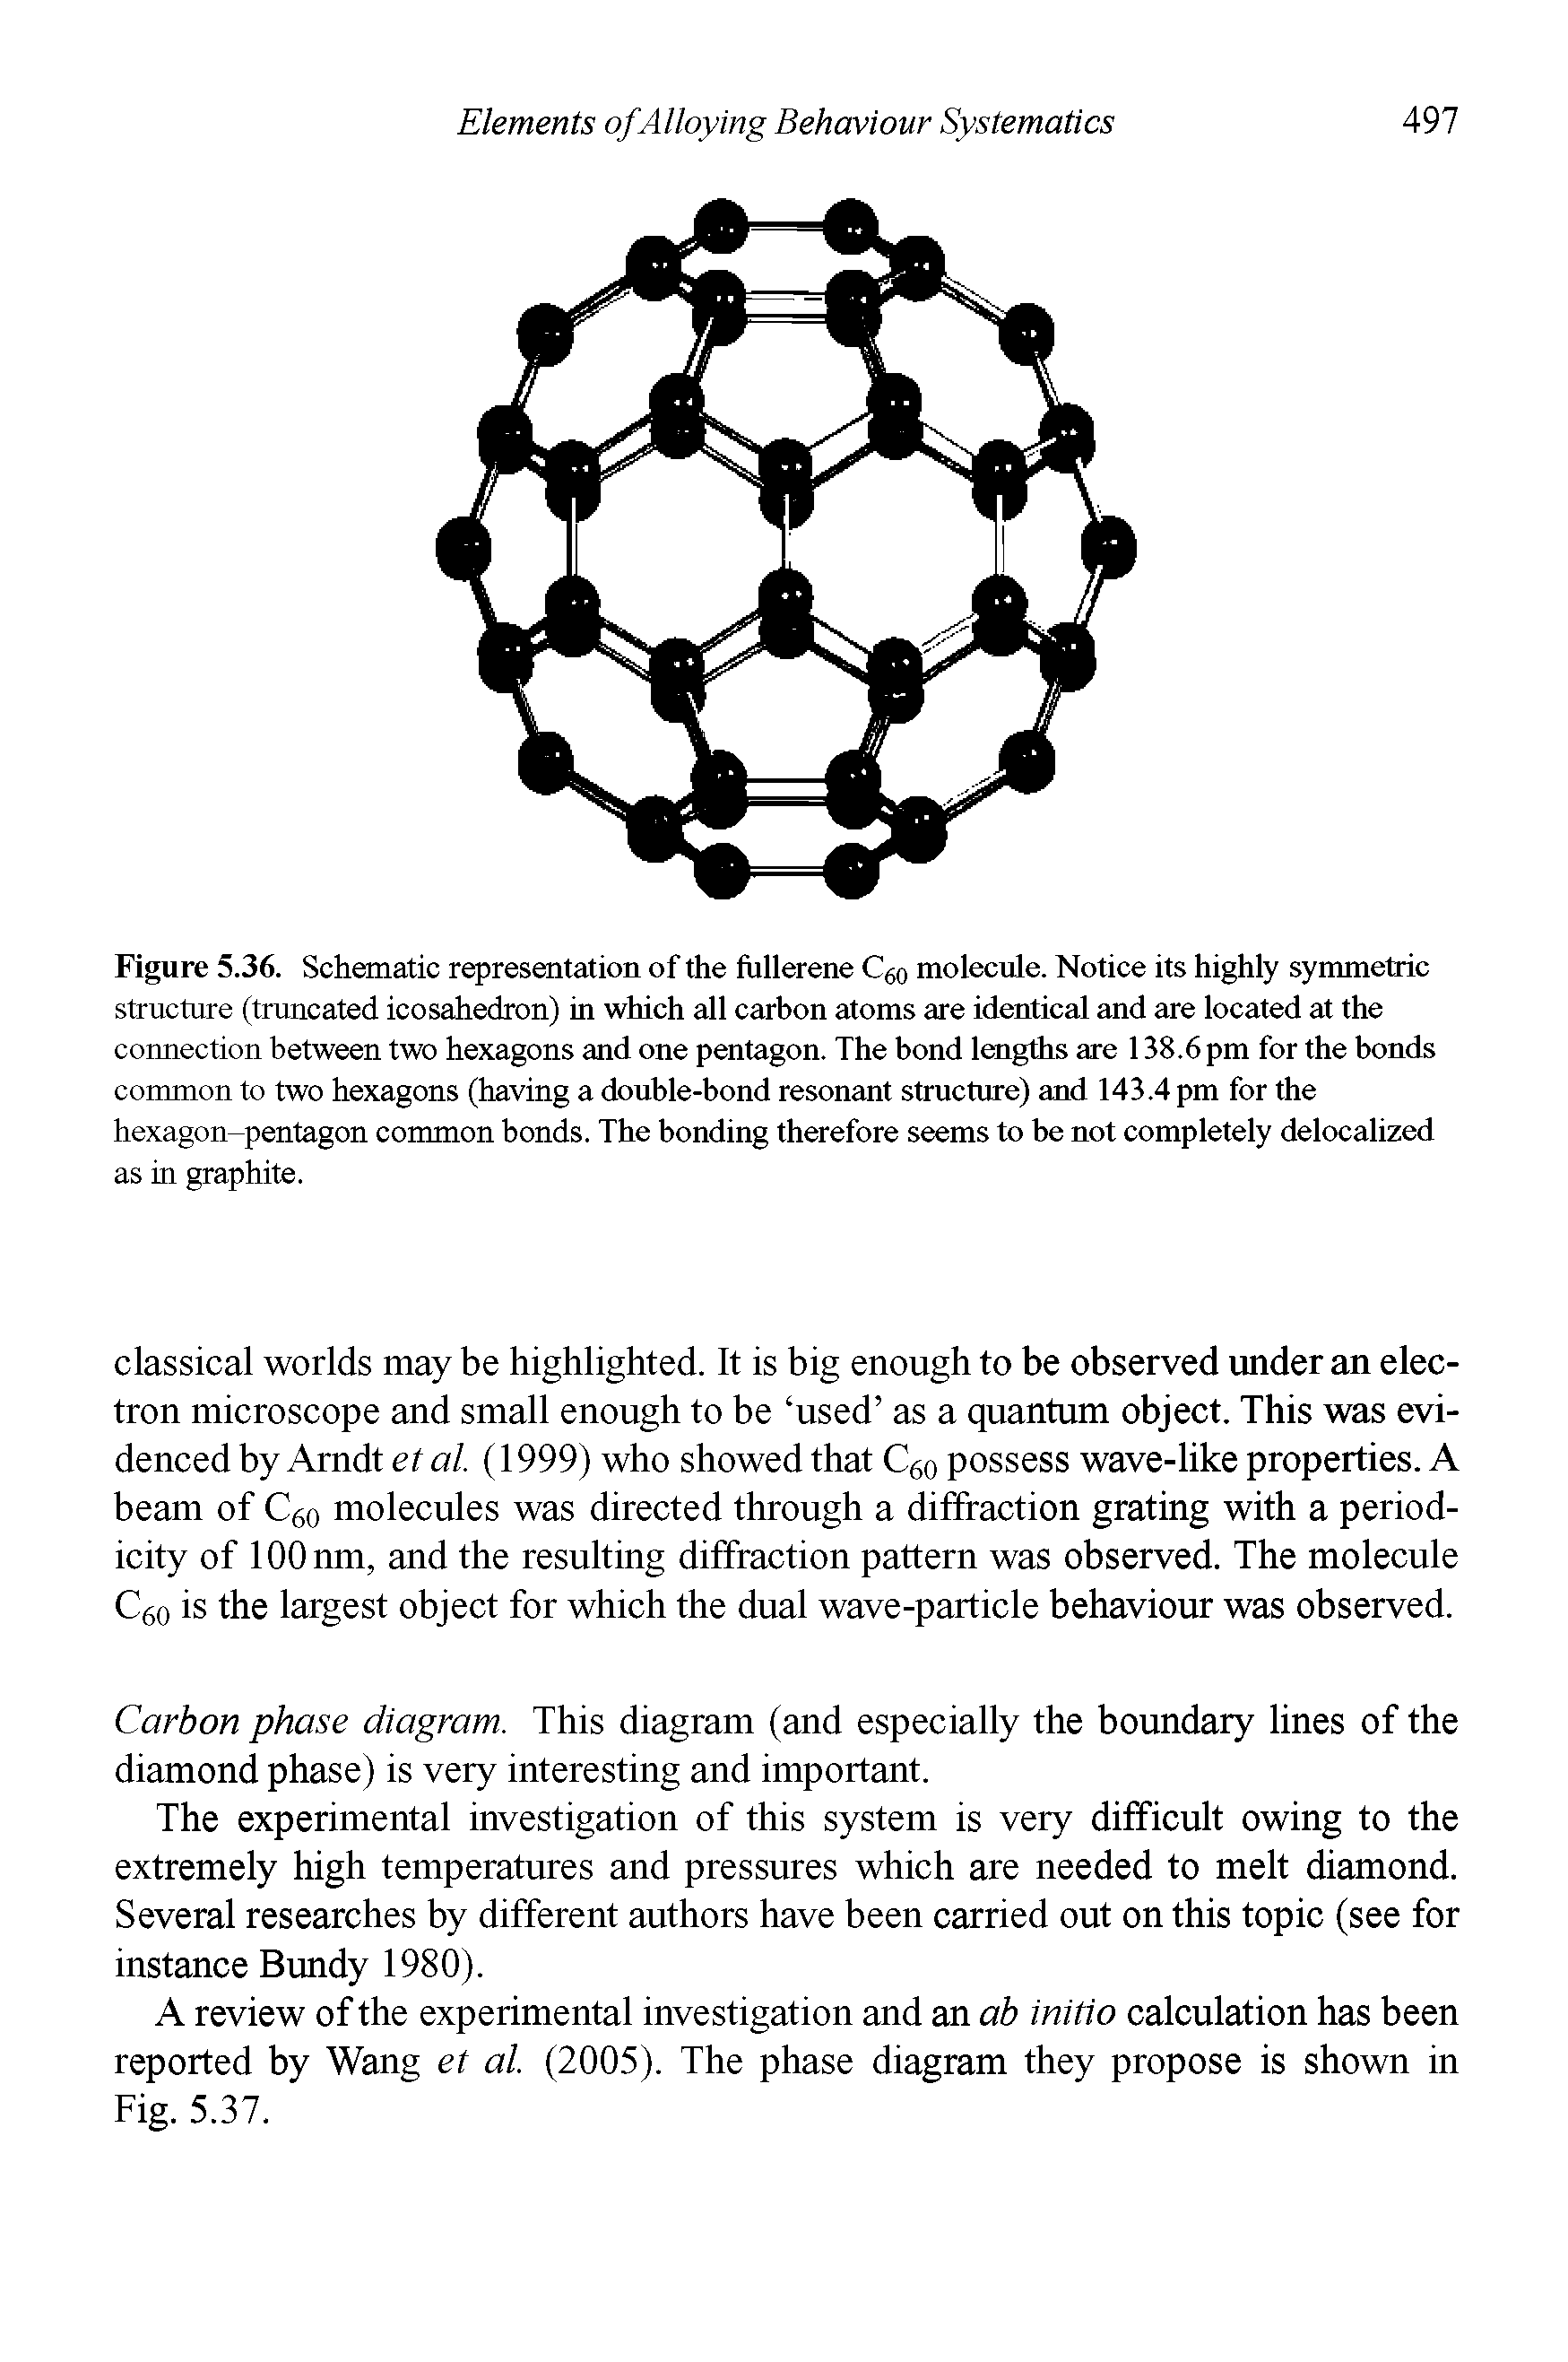 Figure 5.36. Schematic representation of the fullerene C60 molecule. Notice its highly symmetric structure (truncated icosahedron) in which all carbon atoms are identical and are located at the connection between two hexagons and one pentagon. The bond lengths are 138.6 pm for the bonds common to two hexagons (having a double-bond resonant structure) and 143.4 pm for the hexagon-pentagon common bonds. The bonding therefore seems to be not completely delocalized as in graphite.